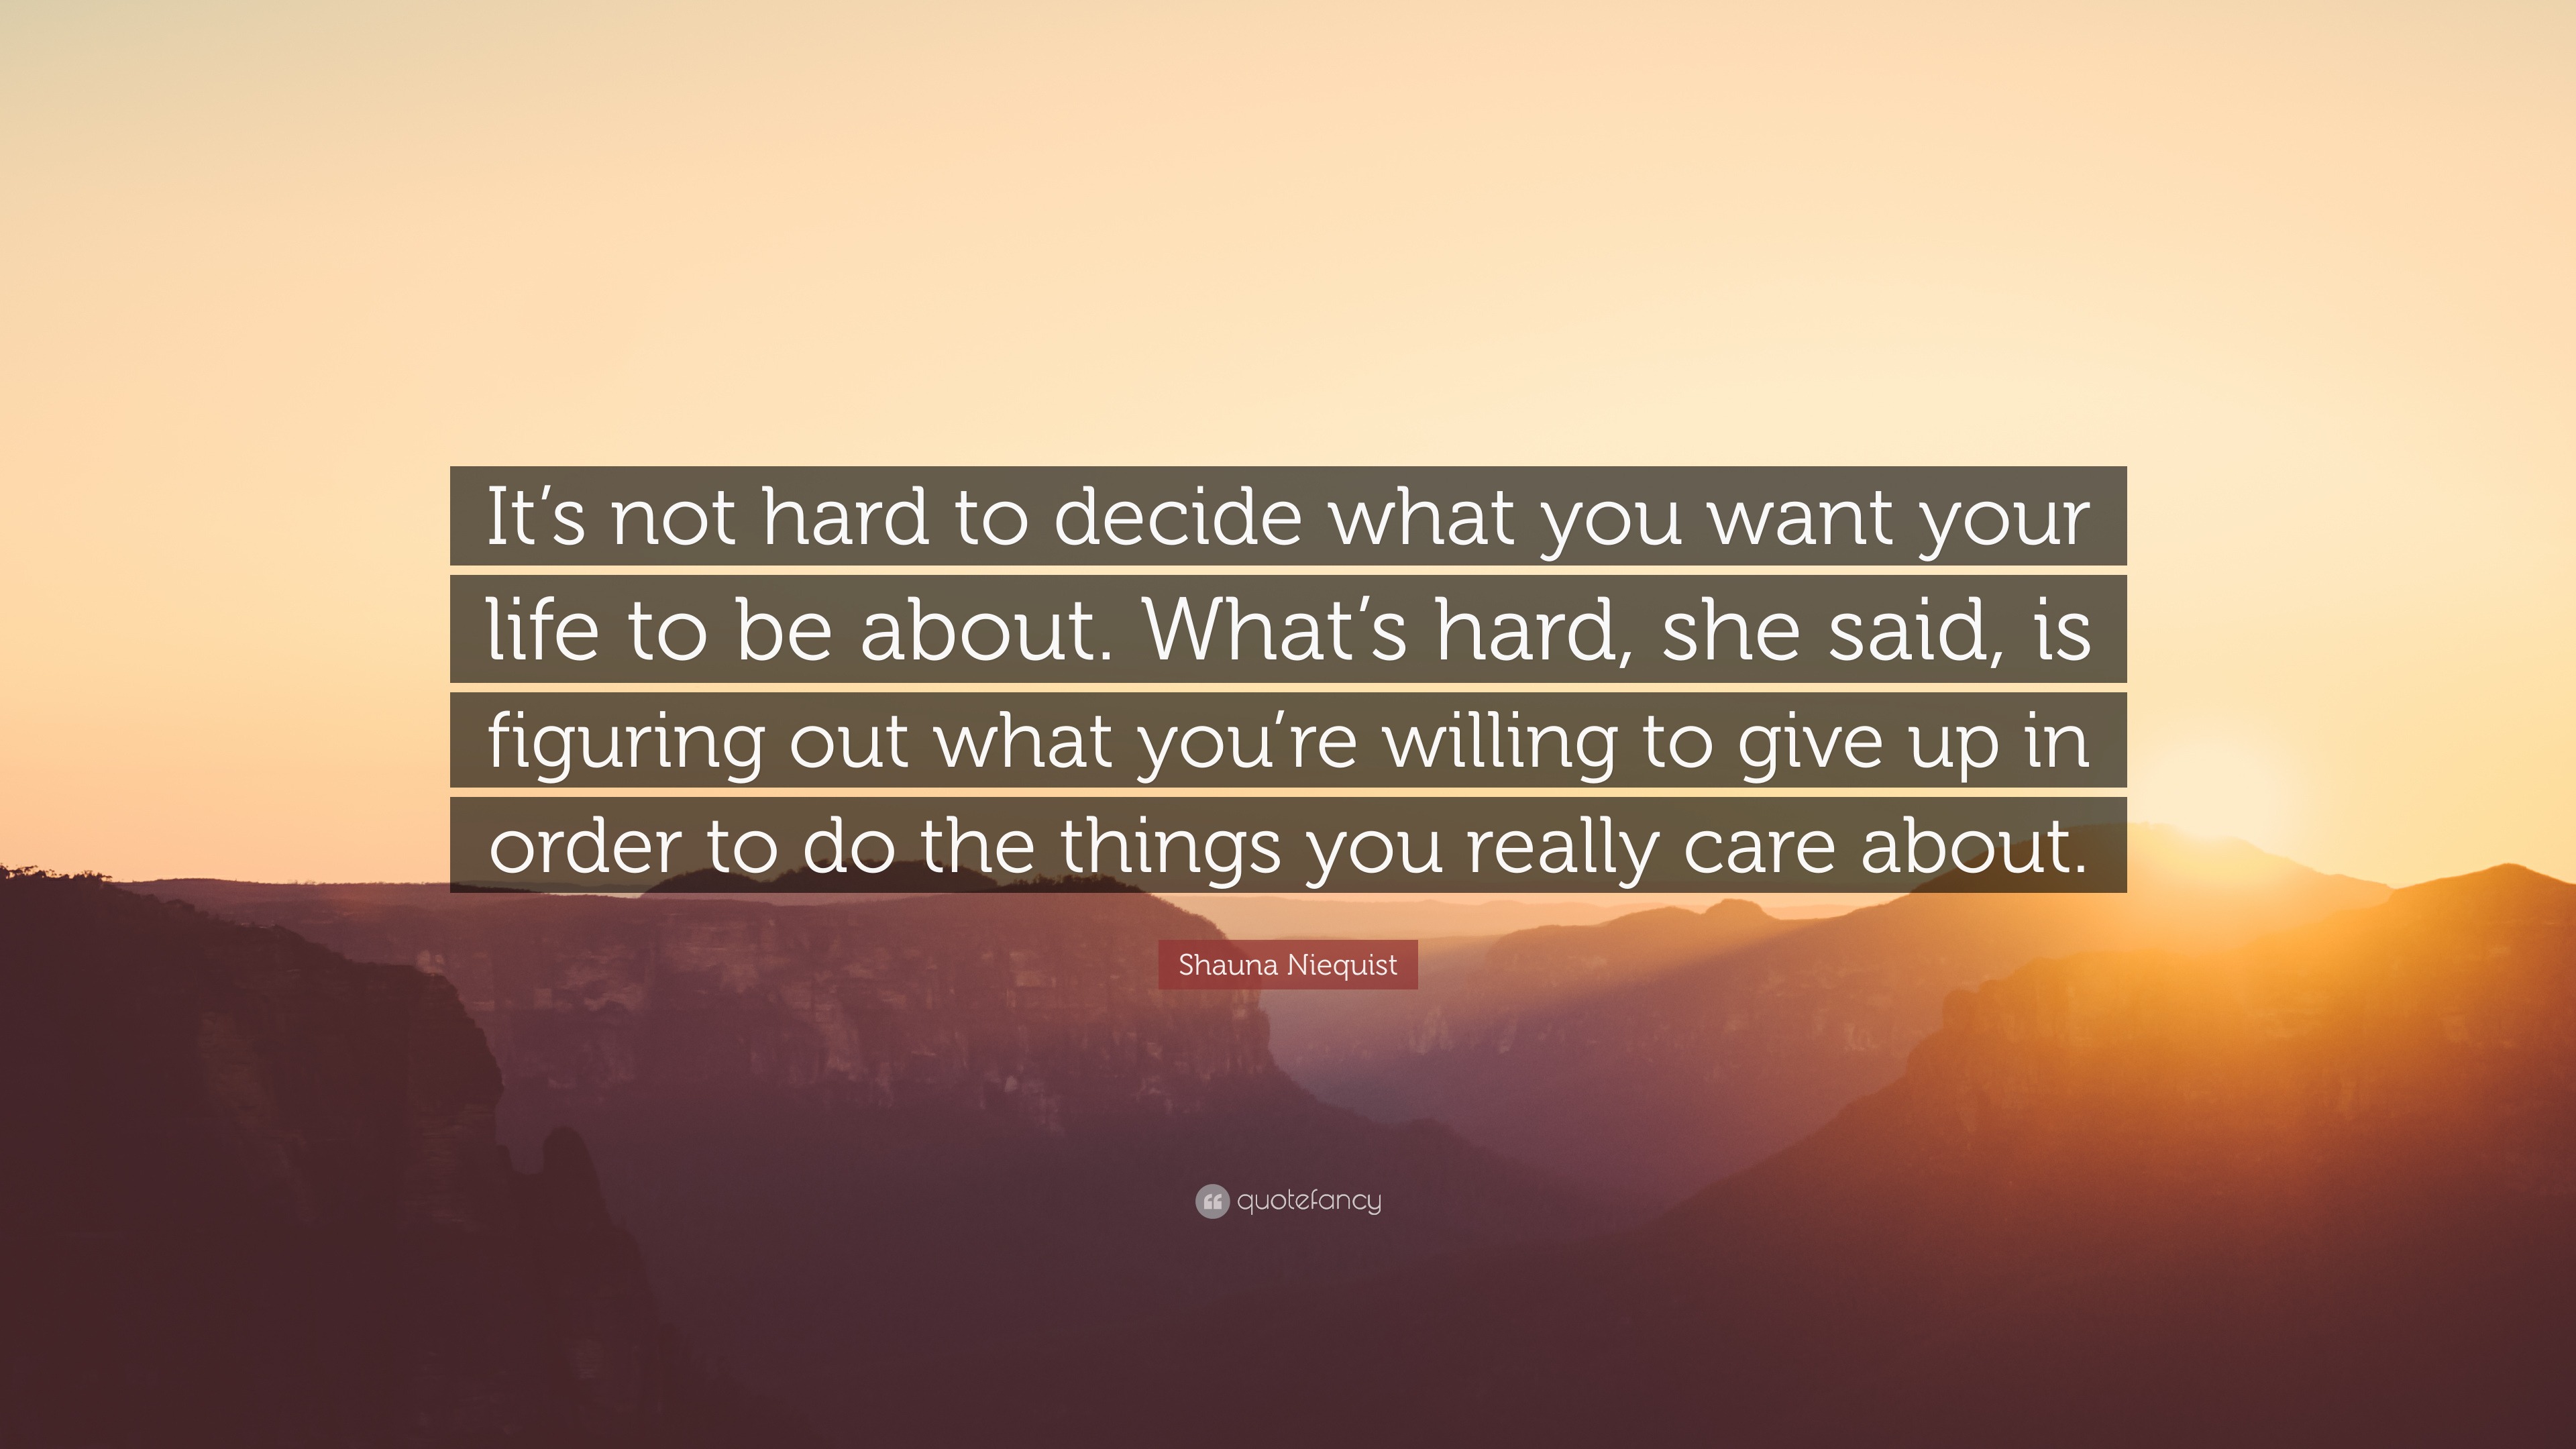 Shauna Niequist Quote: “It’s not hard to decide what you want your life